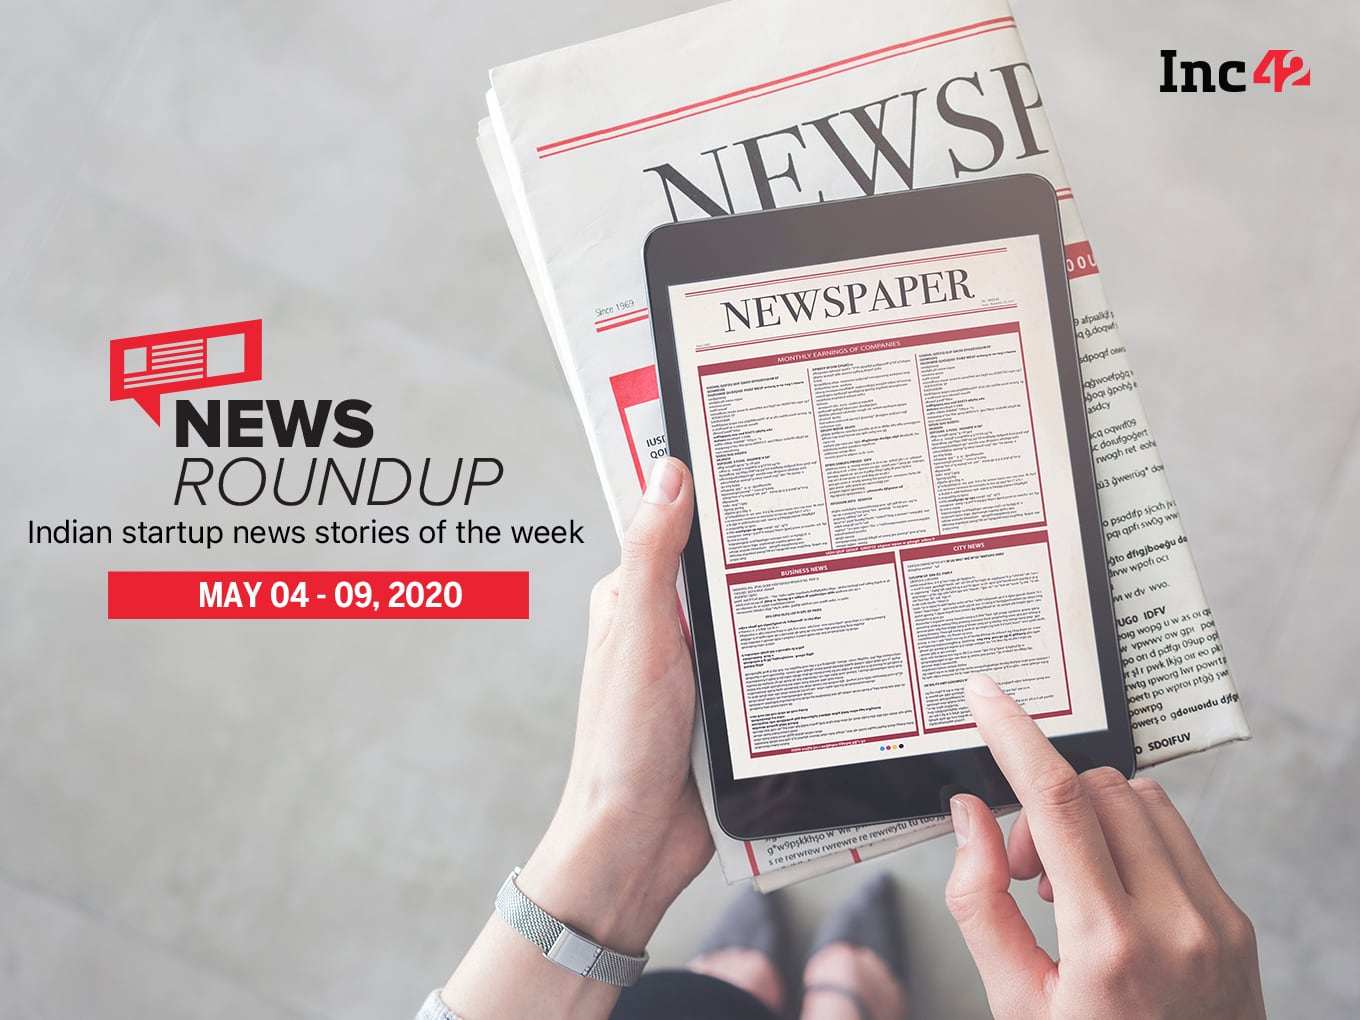 News Roundup: 11 Indian Startup News Stories You Don’t Want To Miss This Week [May 4 - 9]